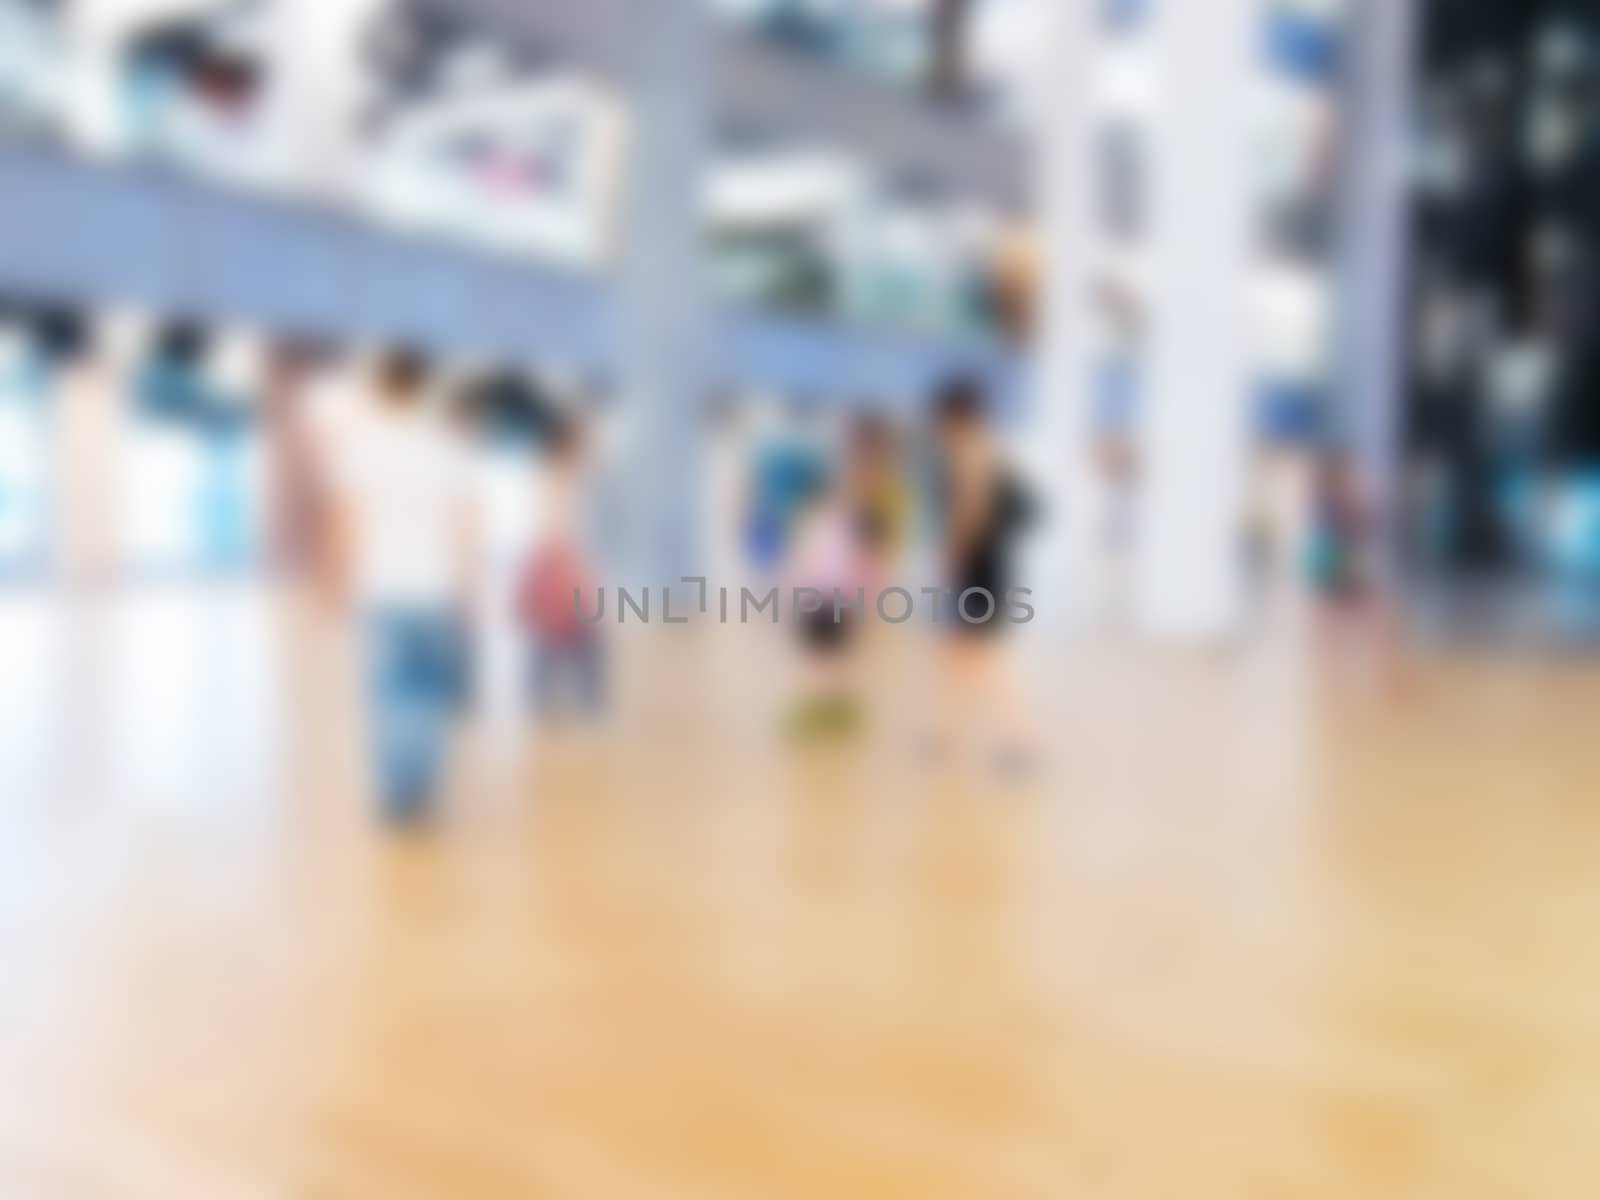 Abstract background of shopping mall, shallow DOF by fascinadora